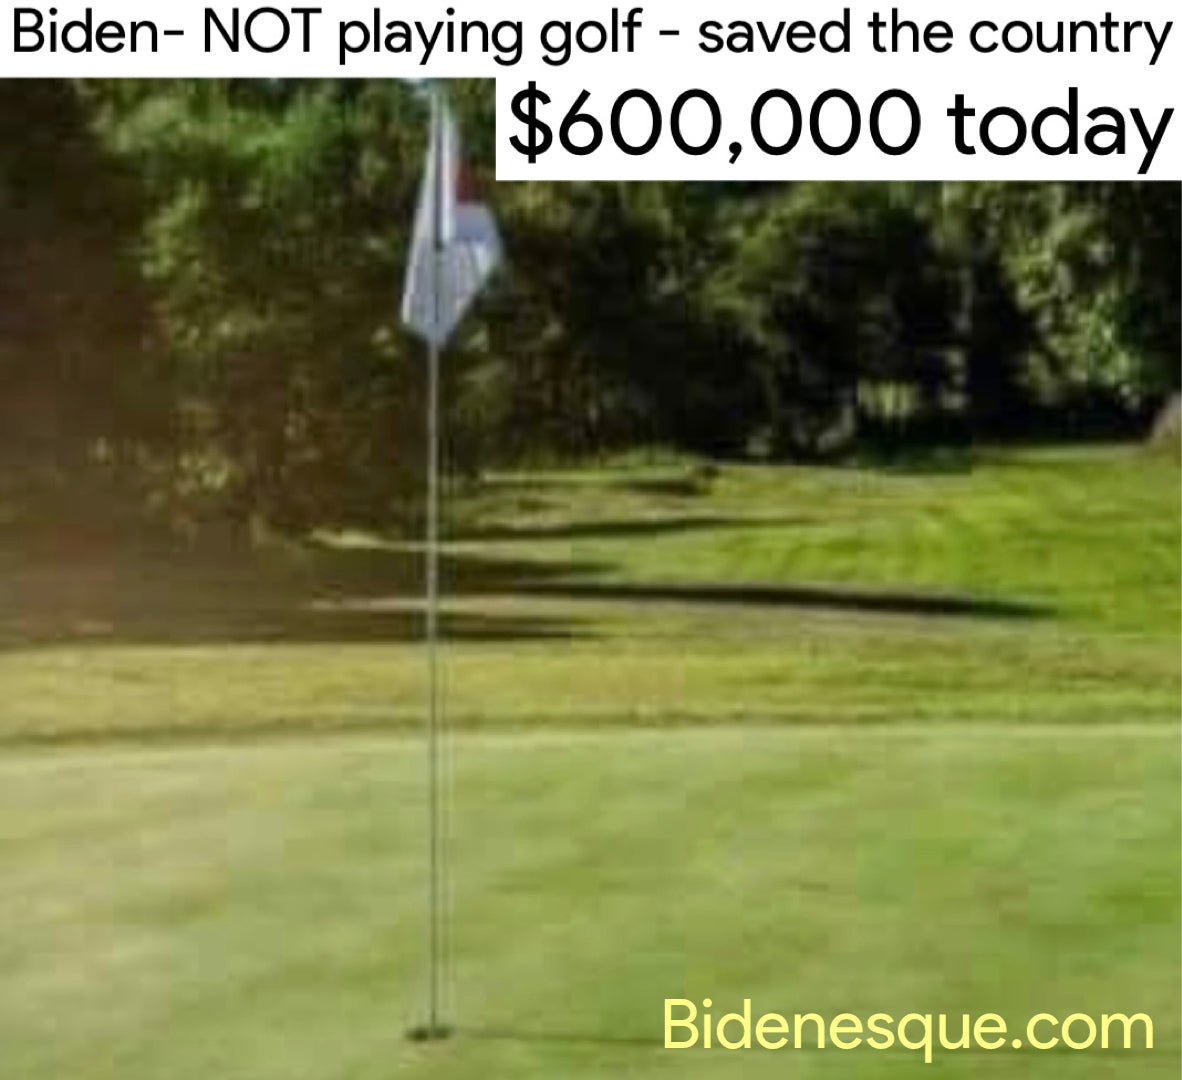 Biden, not playing golf, saved the country $600,000 today.